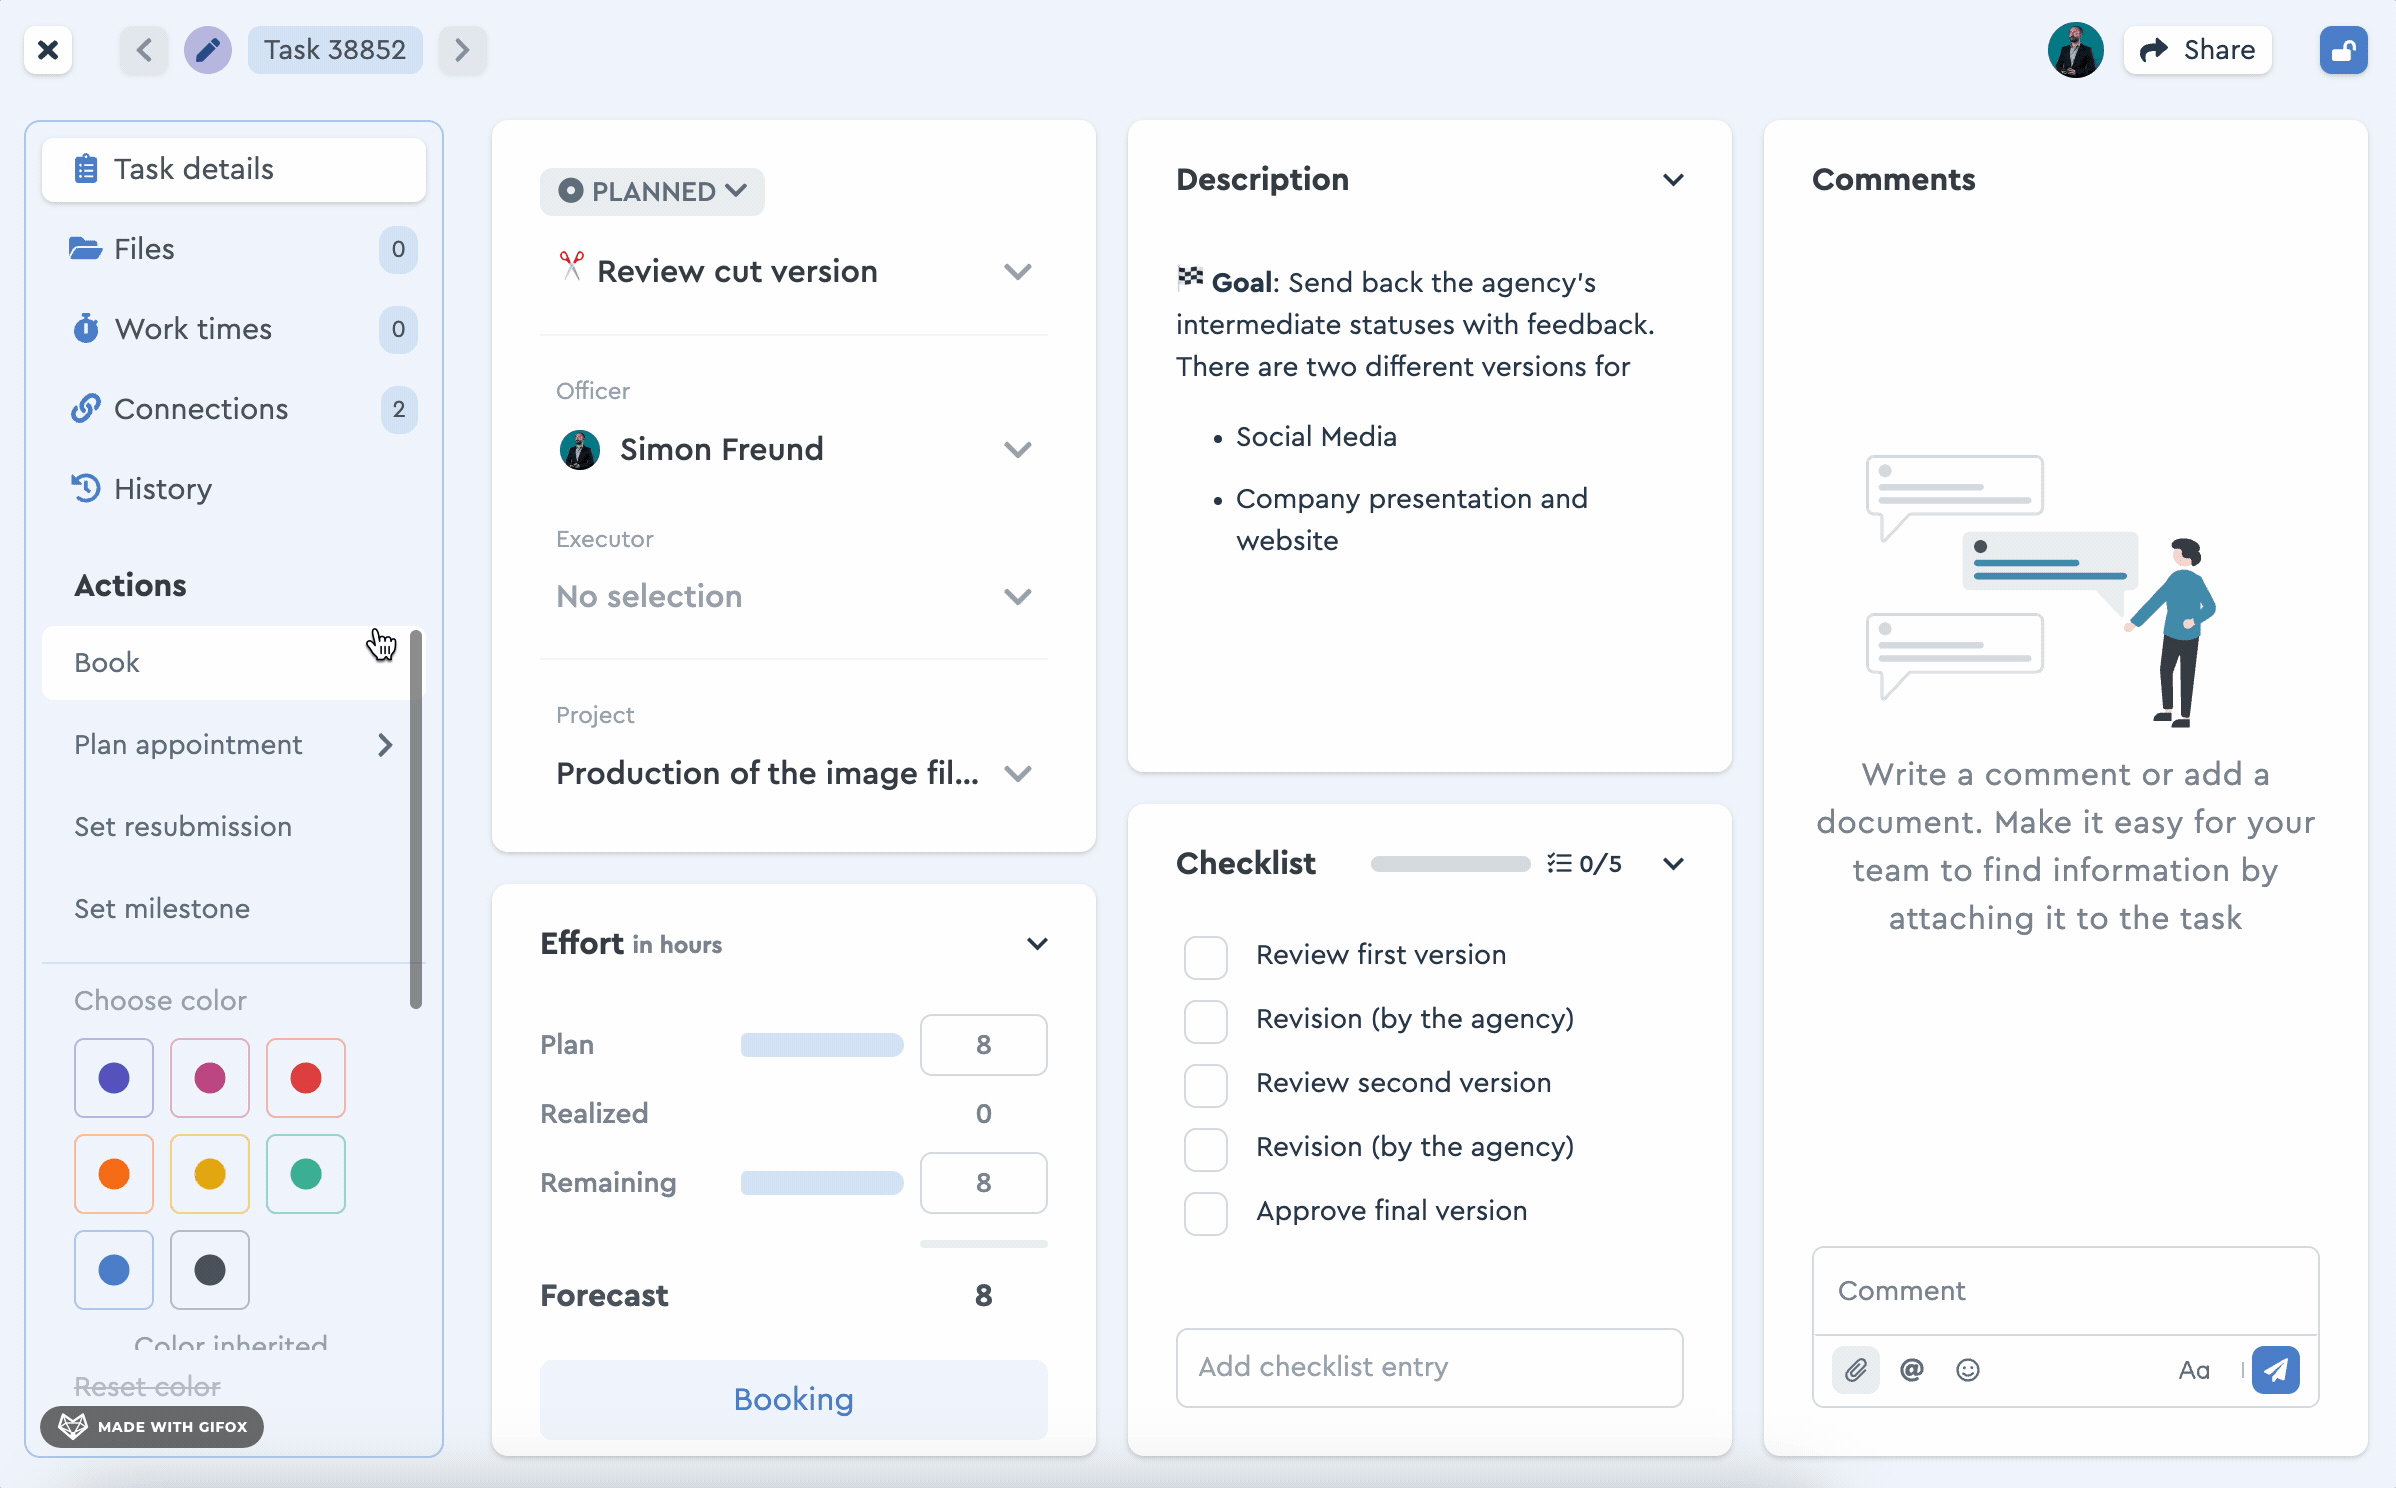 With just one click you can duplicate a task